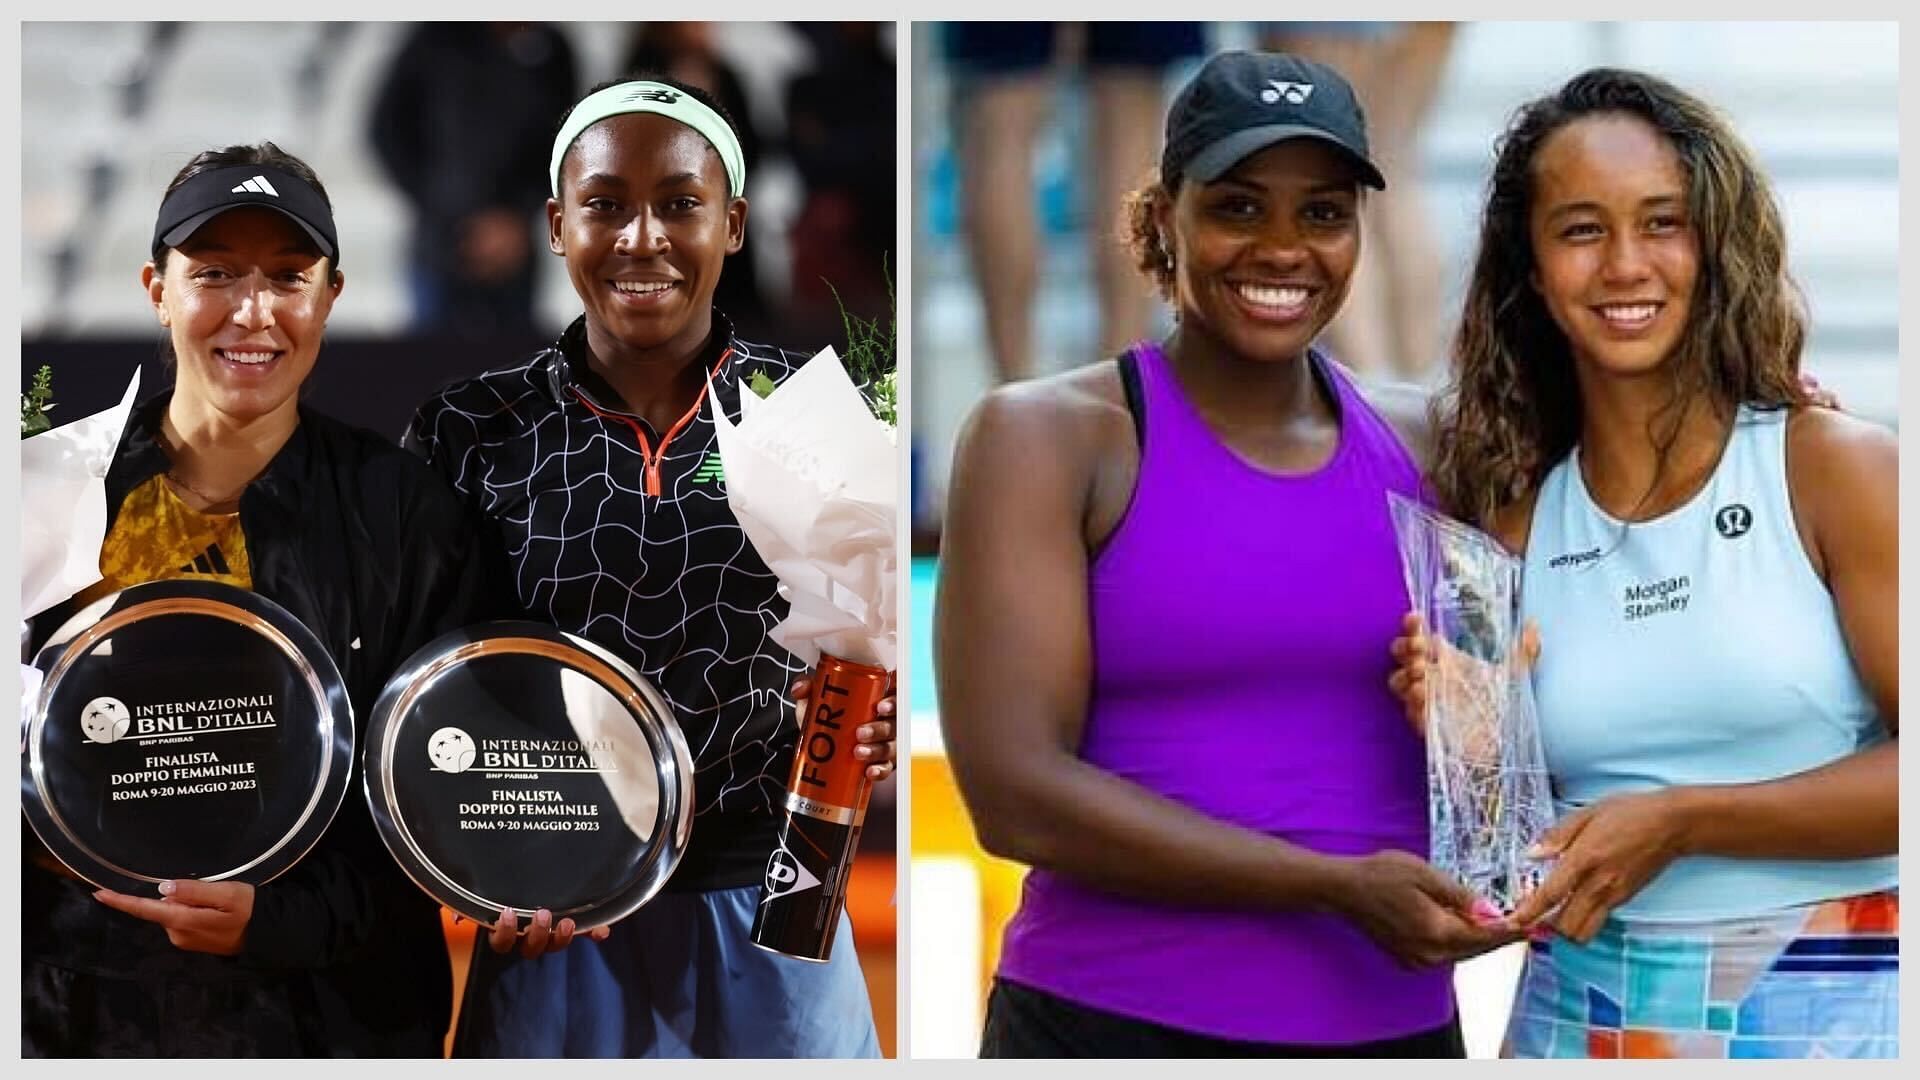 Coco Gauff/Jessica Pegula vs Taylor Townsend/Leylah Fernandez is one of the semifinal matches at the French Open 2023.